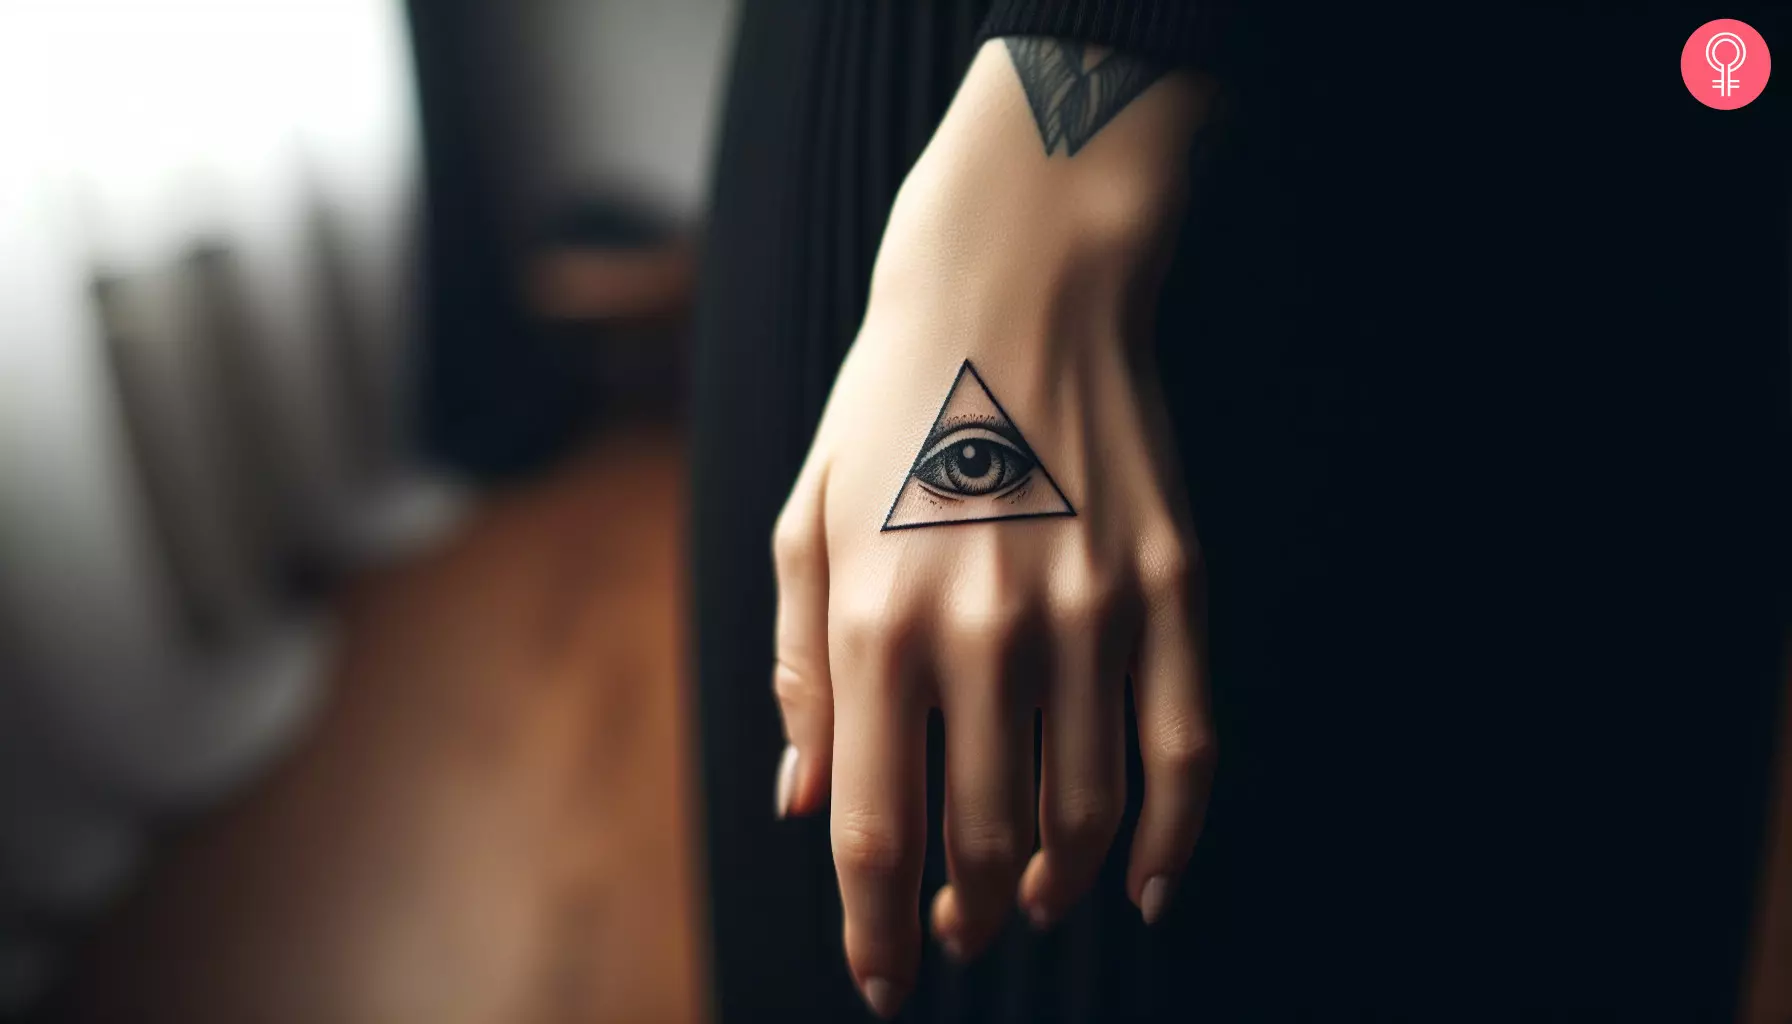 A woman with a triangle eye tattoo on her hand